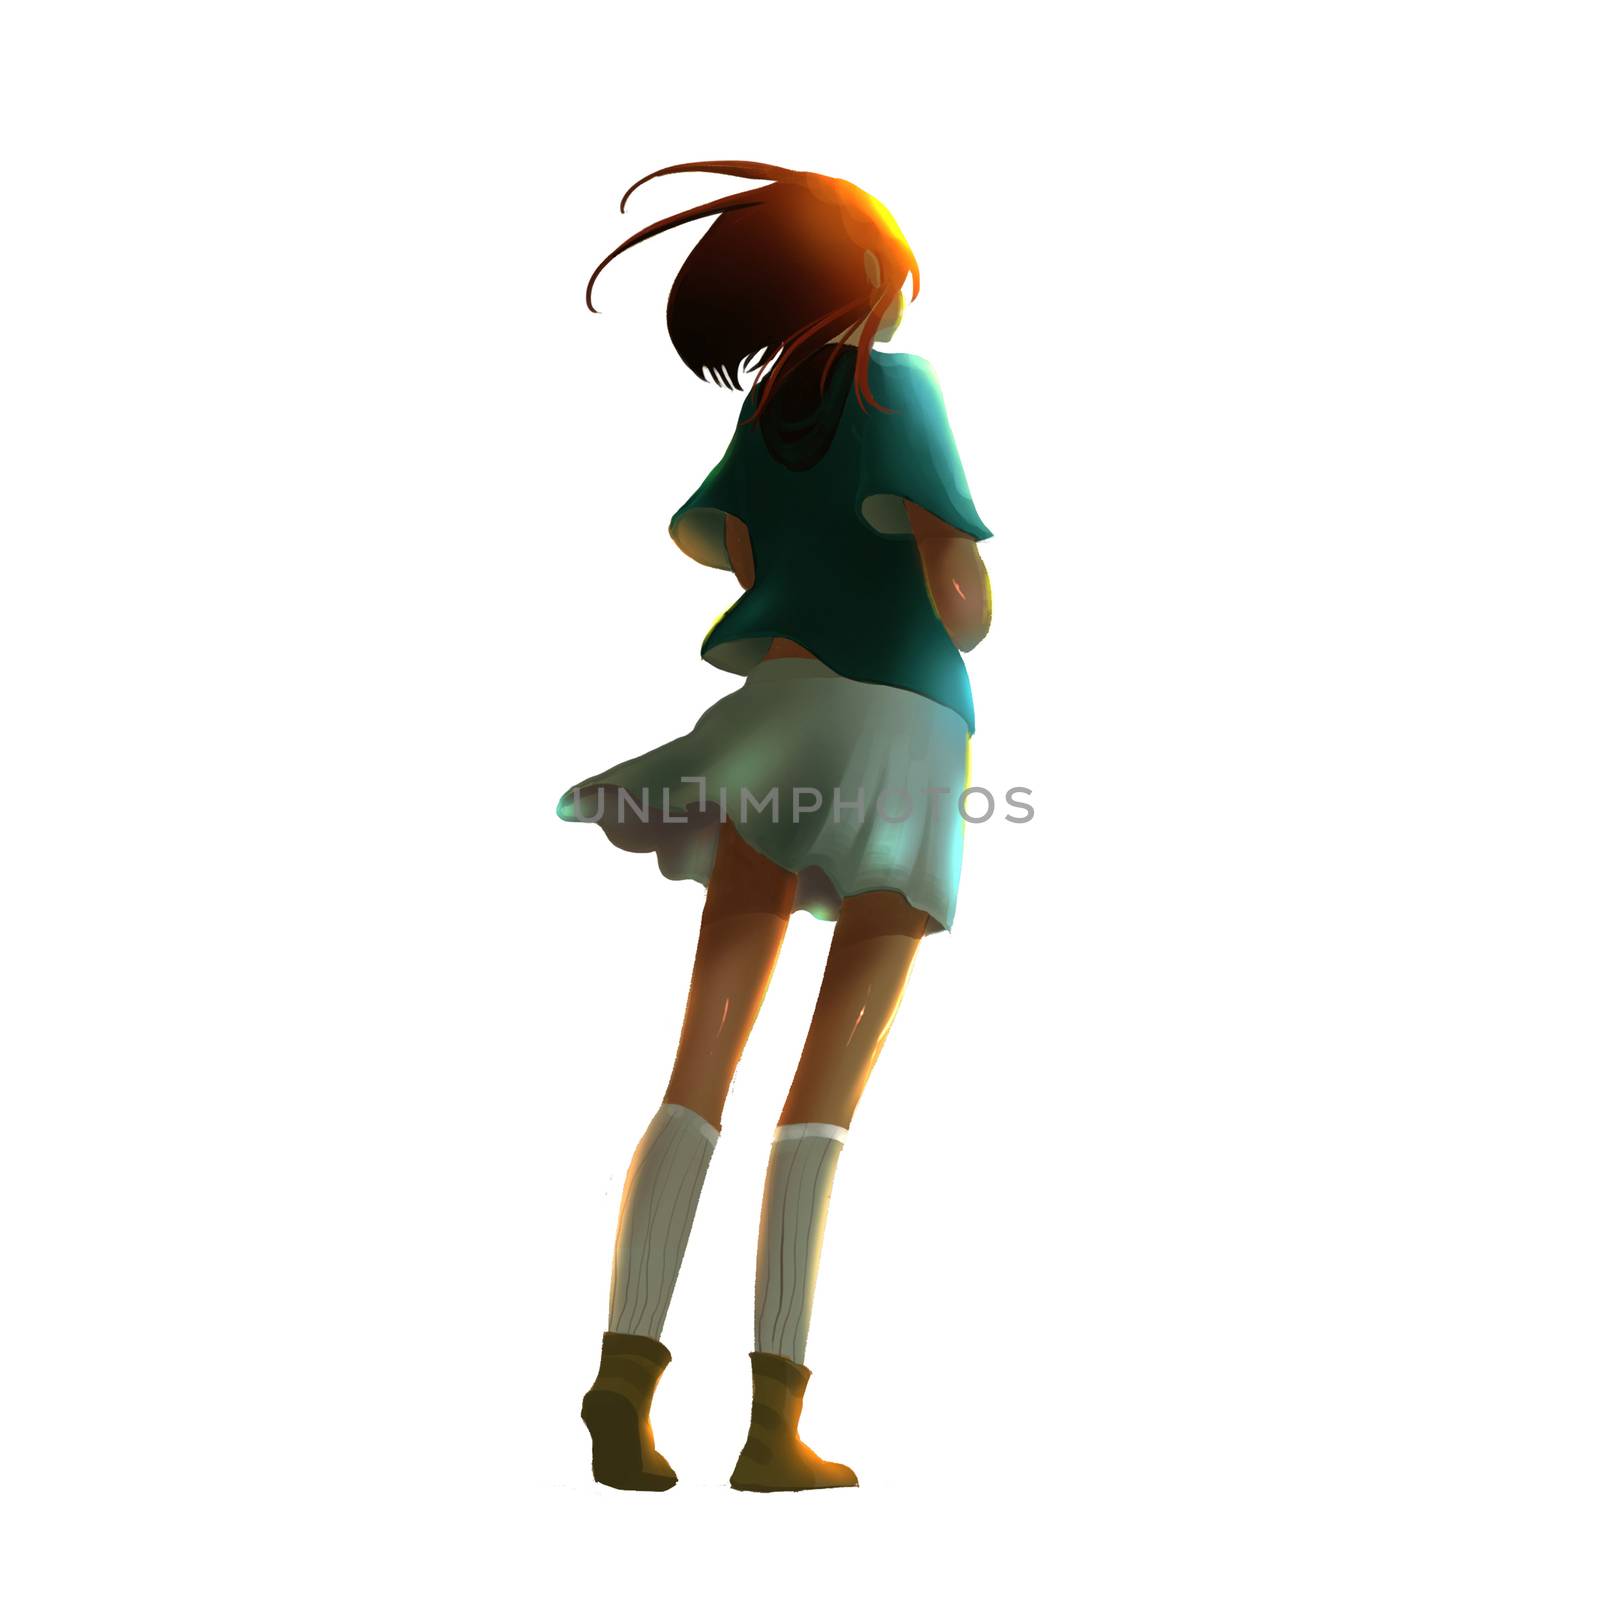 Illustration: Illustration: The Girl lived by the Sea. Put her in a white background in case you need it. Fantastic / Realistic / Cartoon Style. Wallpaper / Background / Scene Design